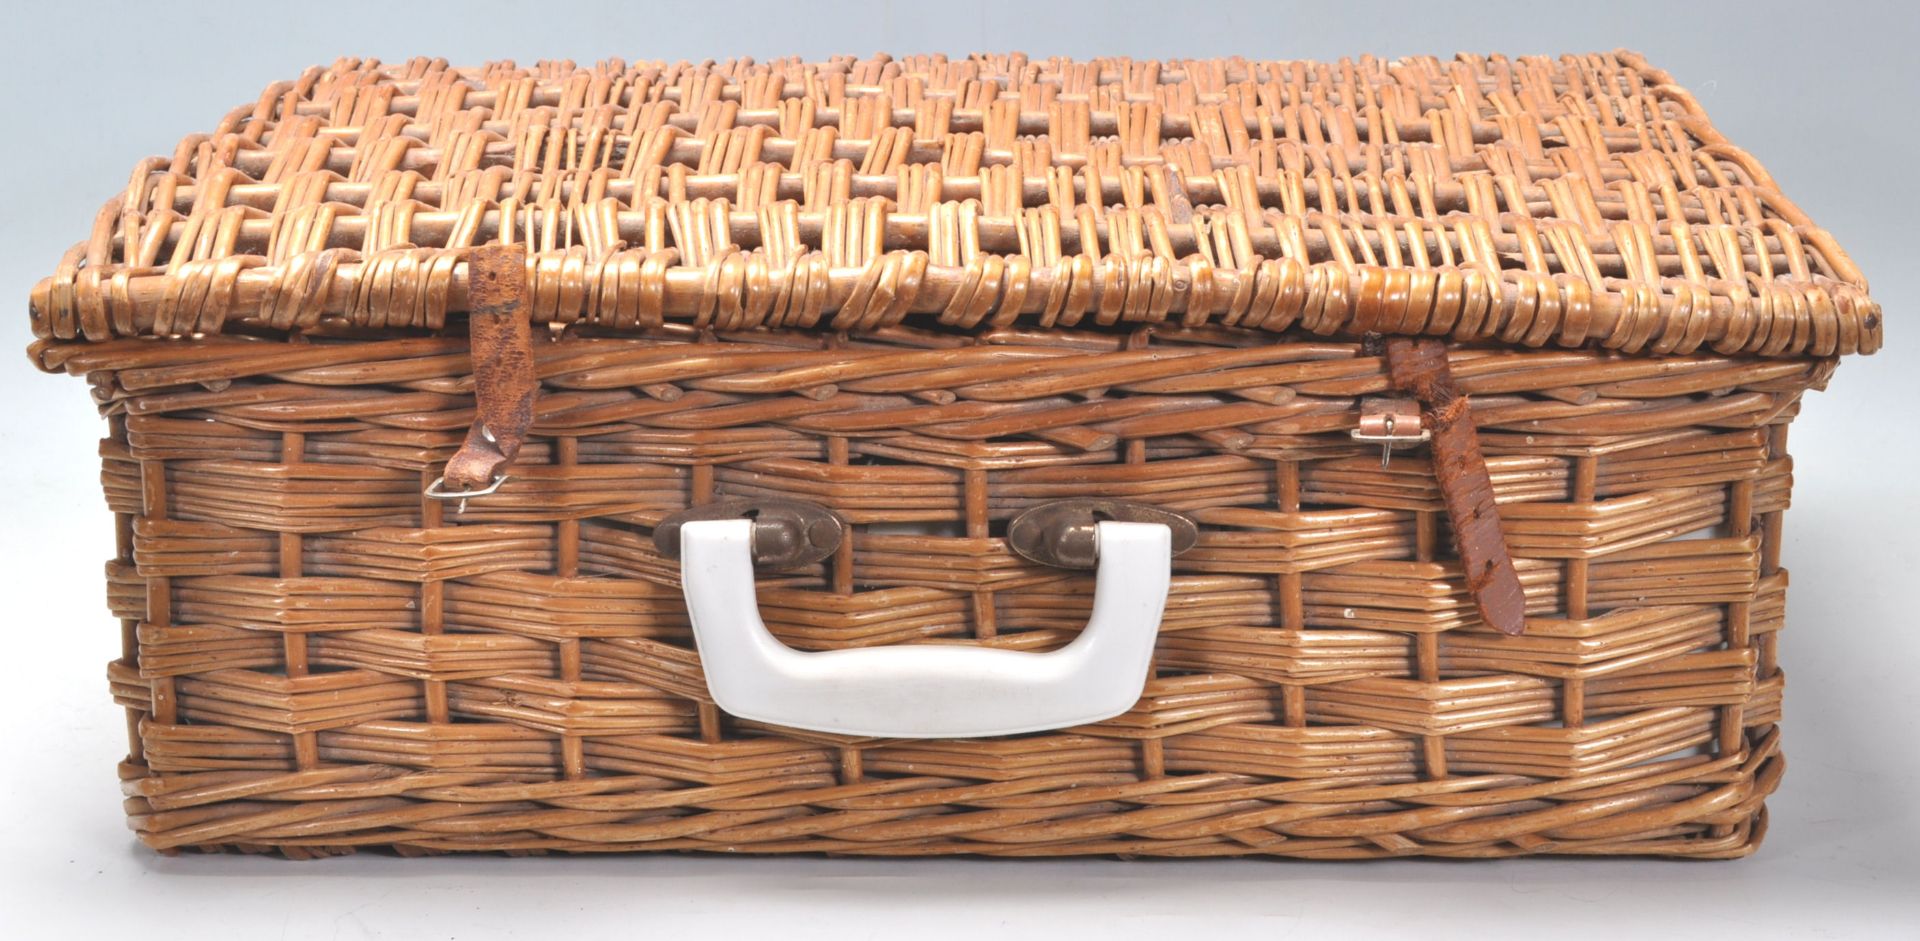 A vintage 1950s picnic basket / hamper fitted with plastic wares.